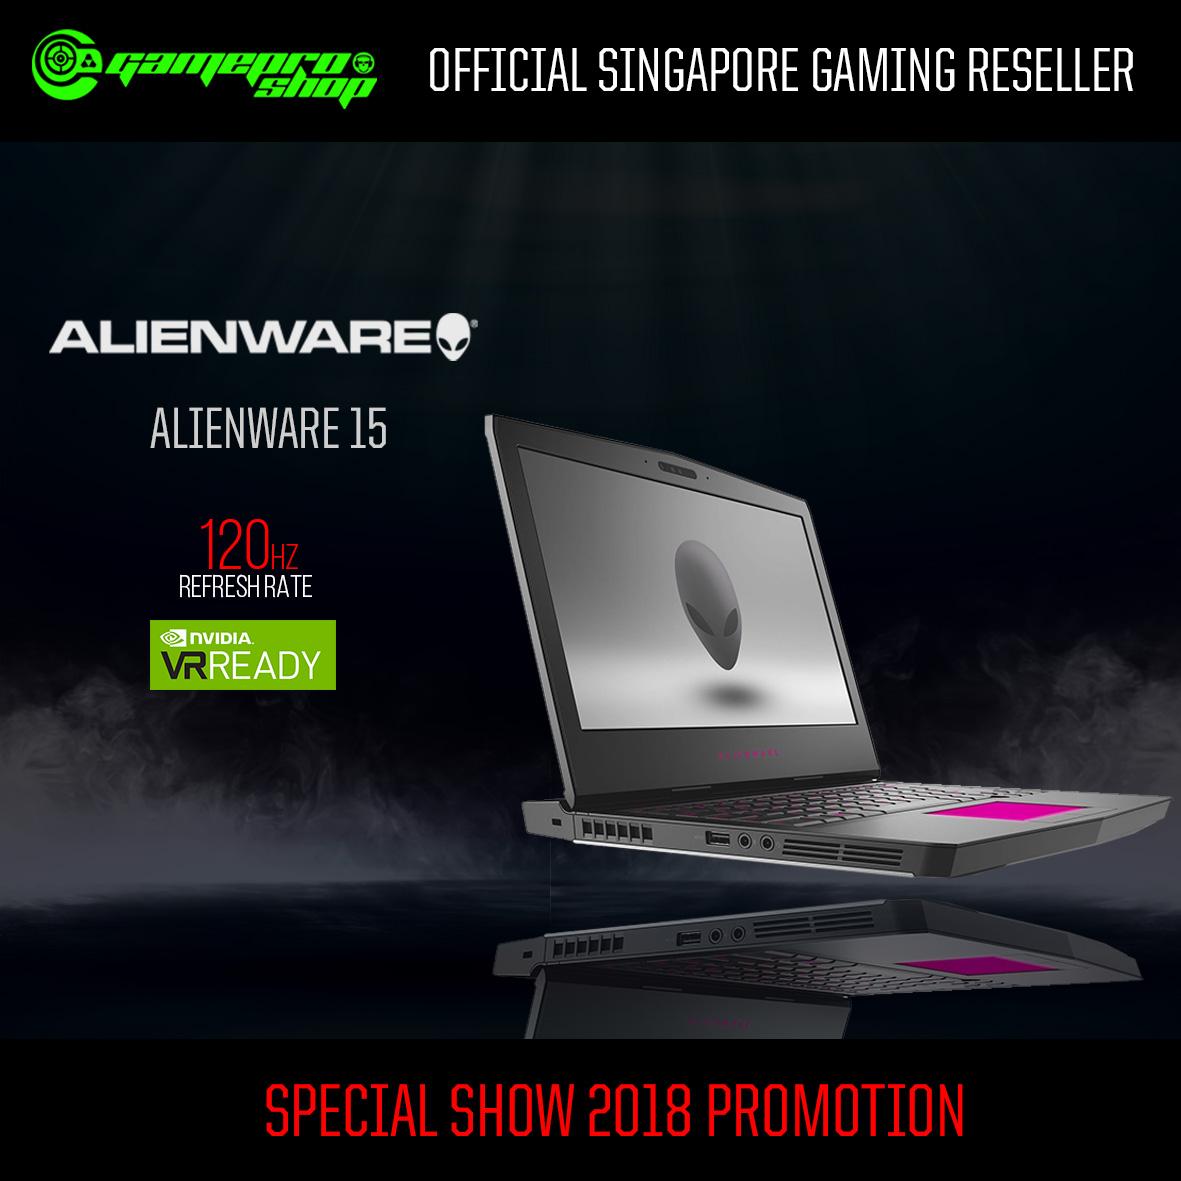 Alienware 15 R3 Gaming Laptop (7th Gen) (GTX1060) With 120Hz Gaming Laptop *END OF MONTH PROMO*